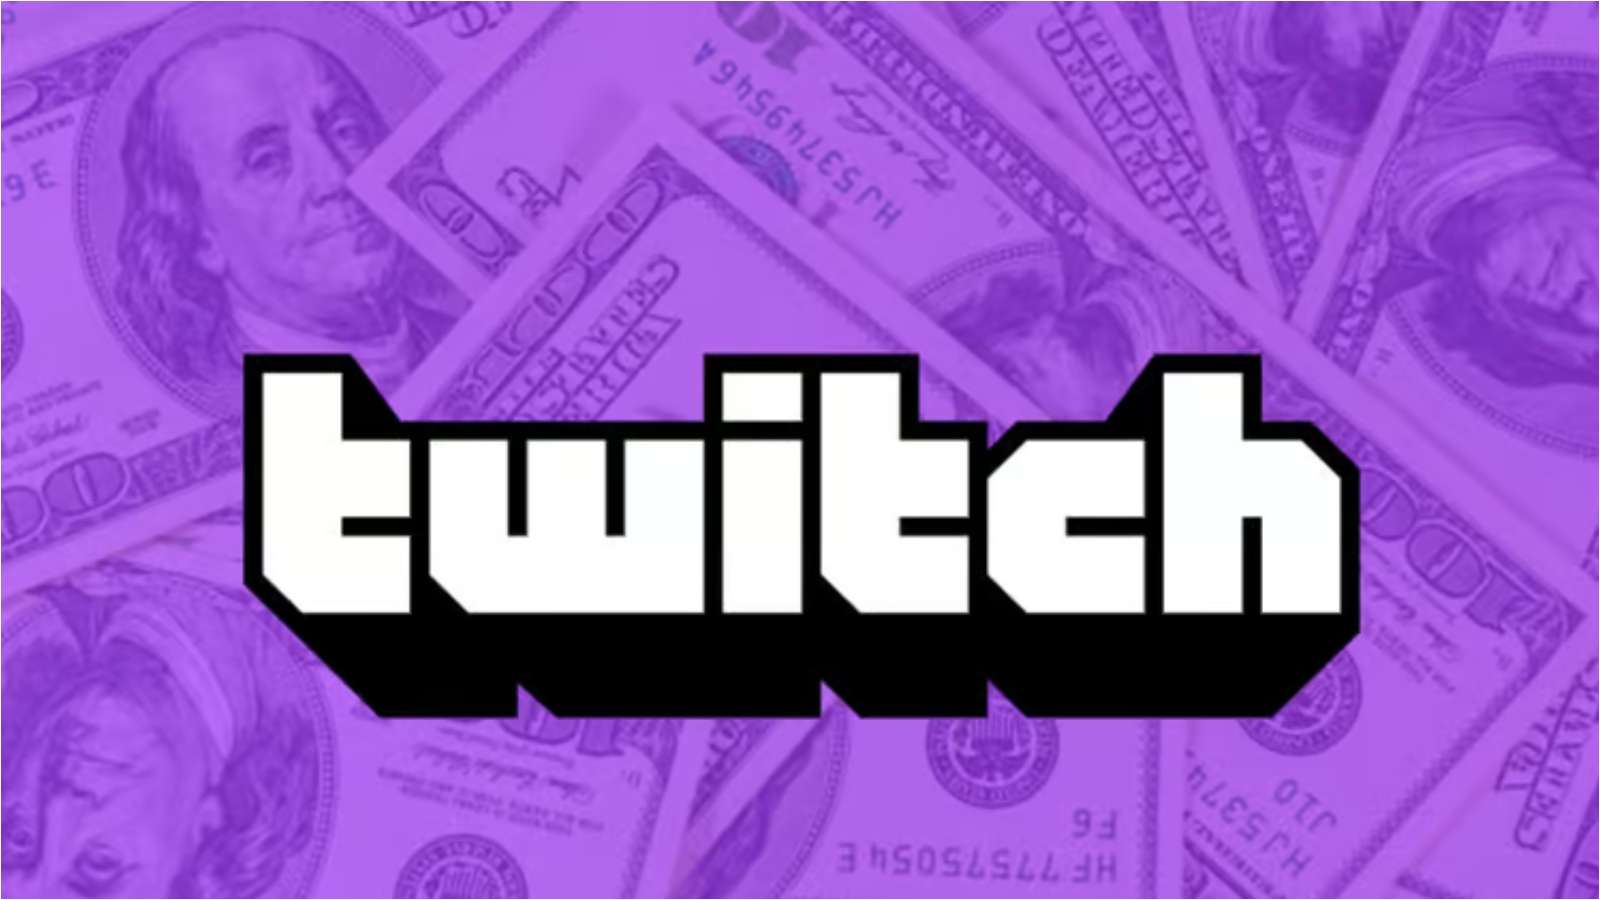 twitch logo with us dollars in background